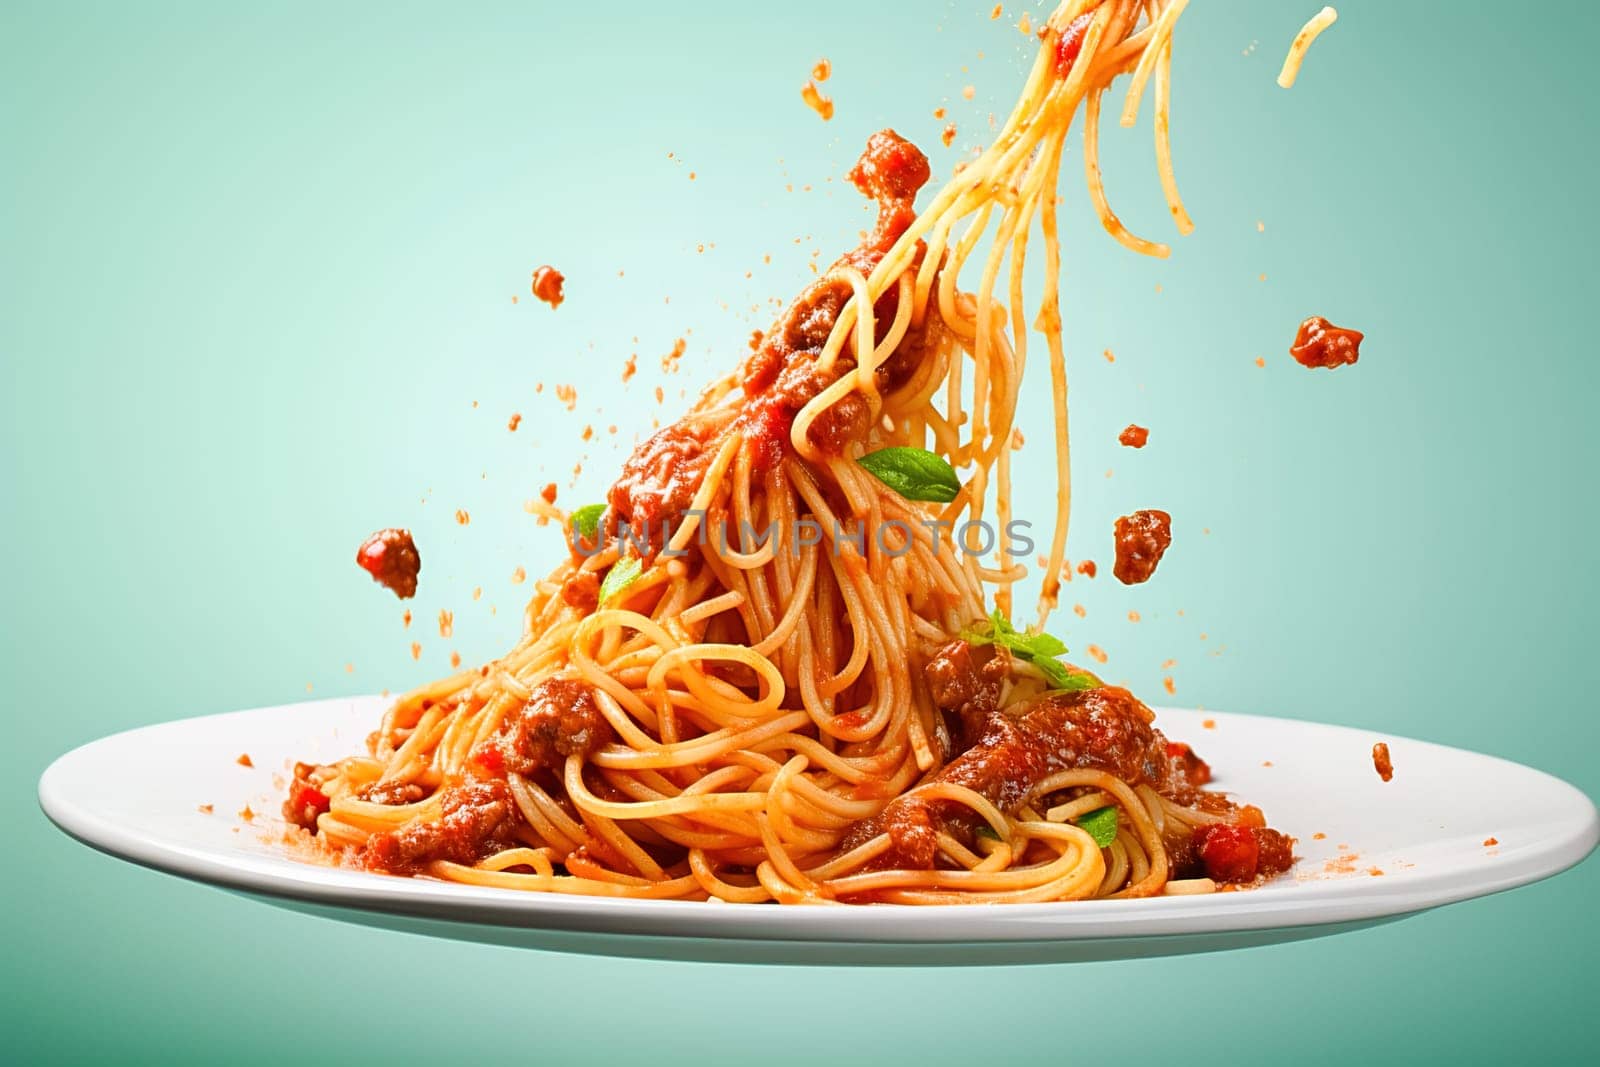 Spaghetti with tomato sauce in a bowl. Levitation. by Yurich32